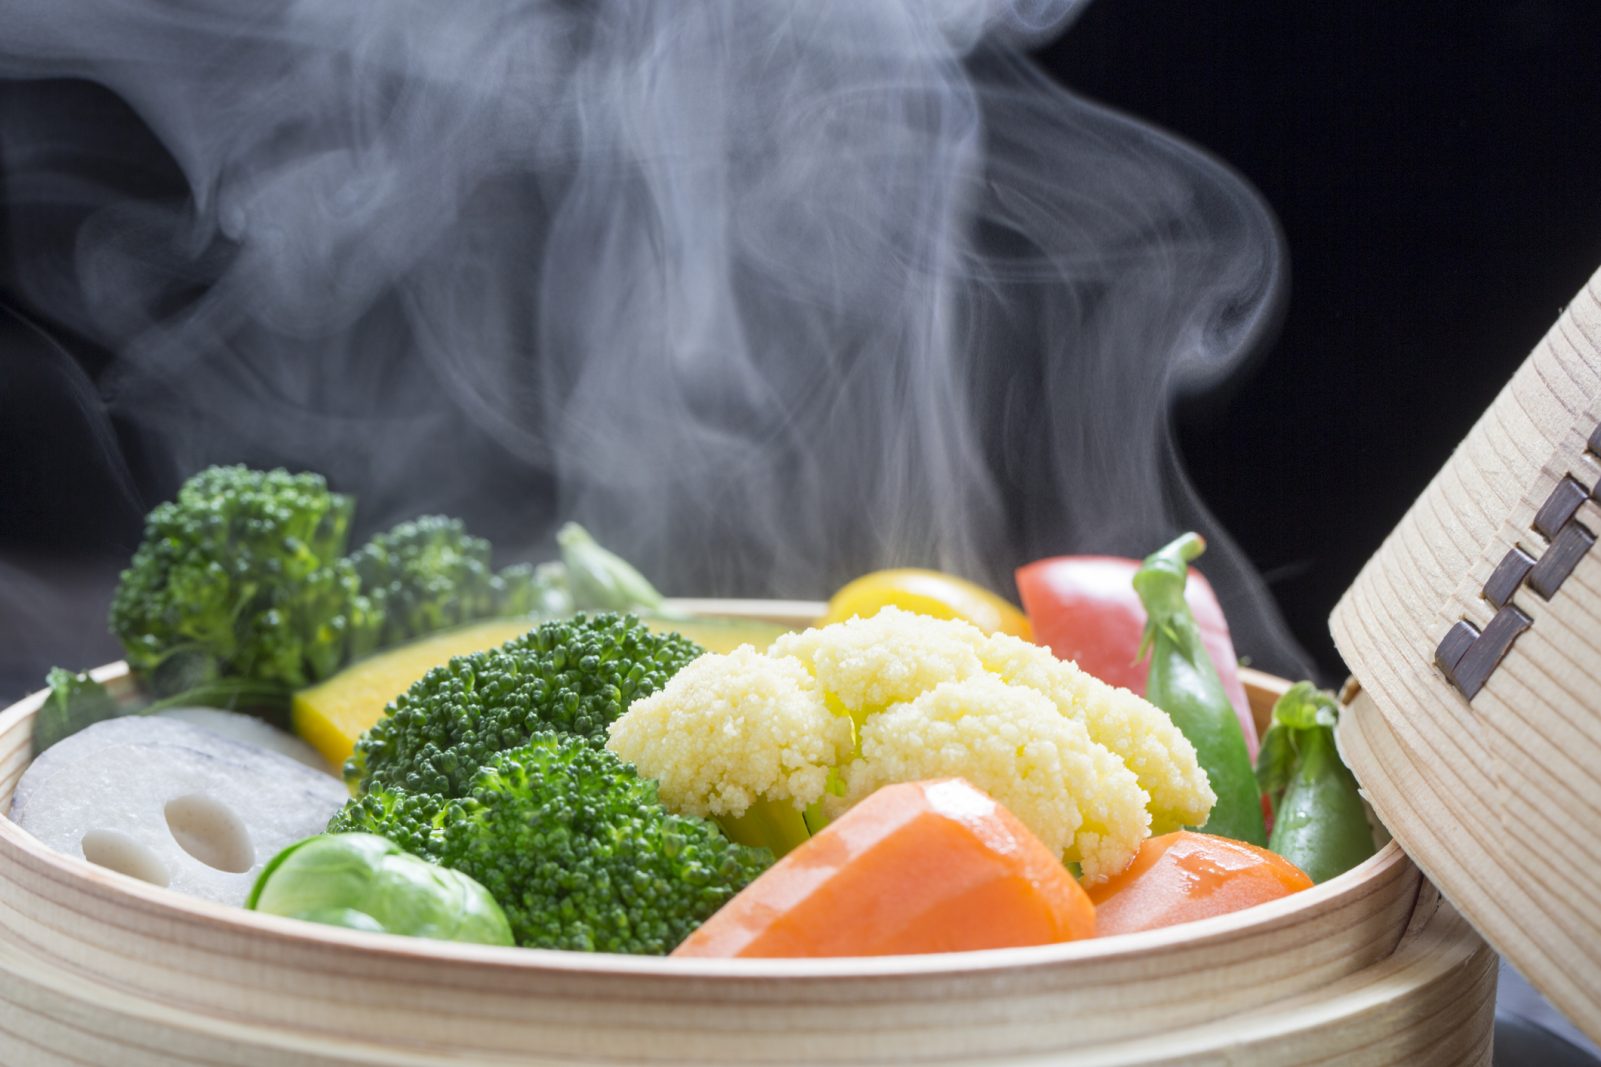 How Sophisticated Is Your Taste in Food? Vegetables steamed